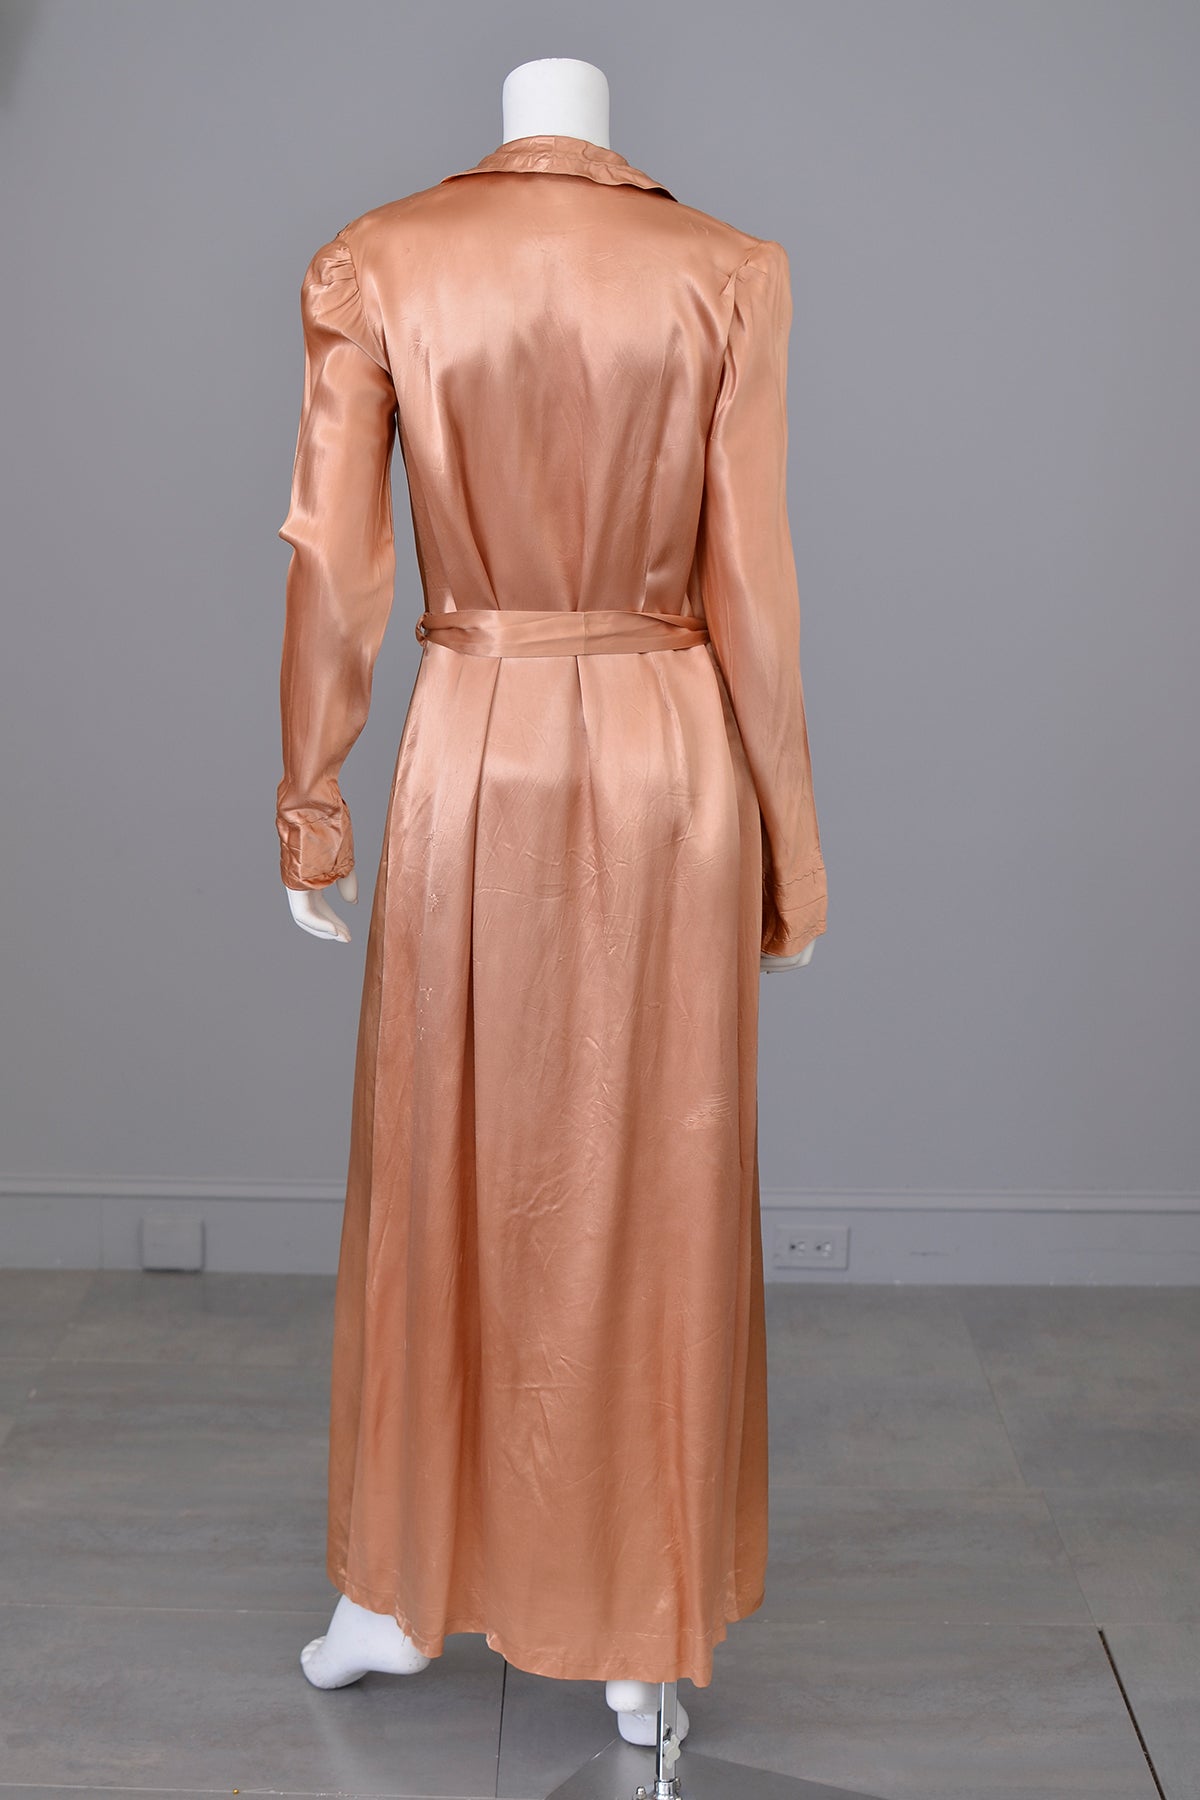 1940s Copper Satin Lounging Robe